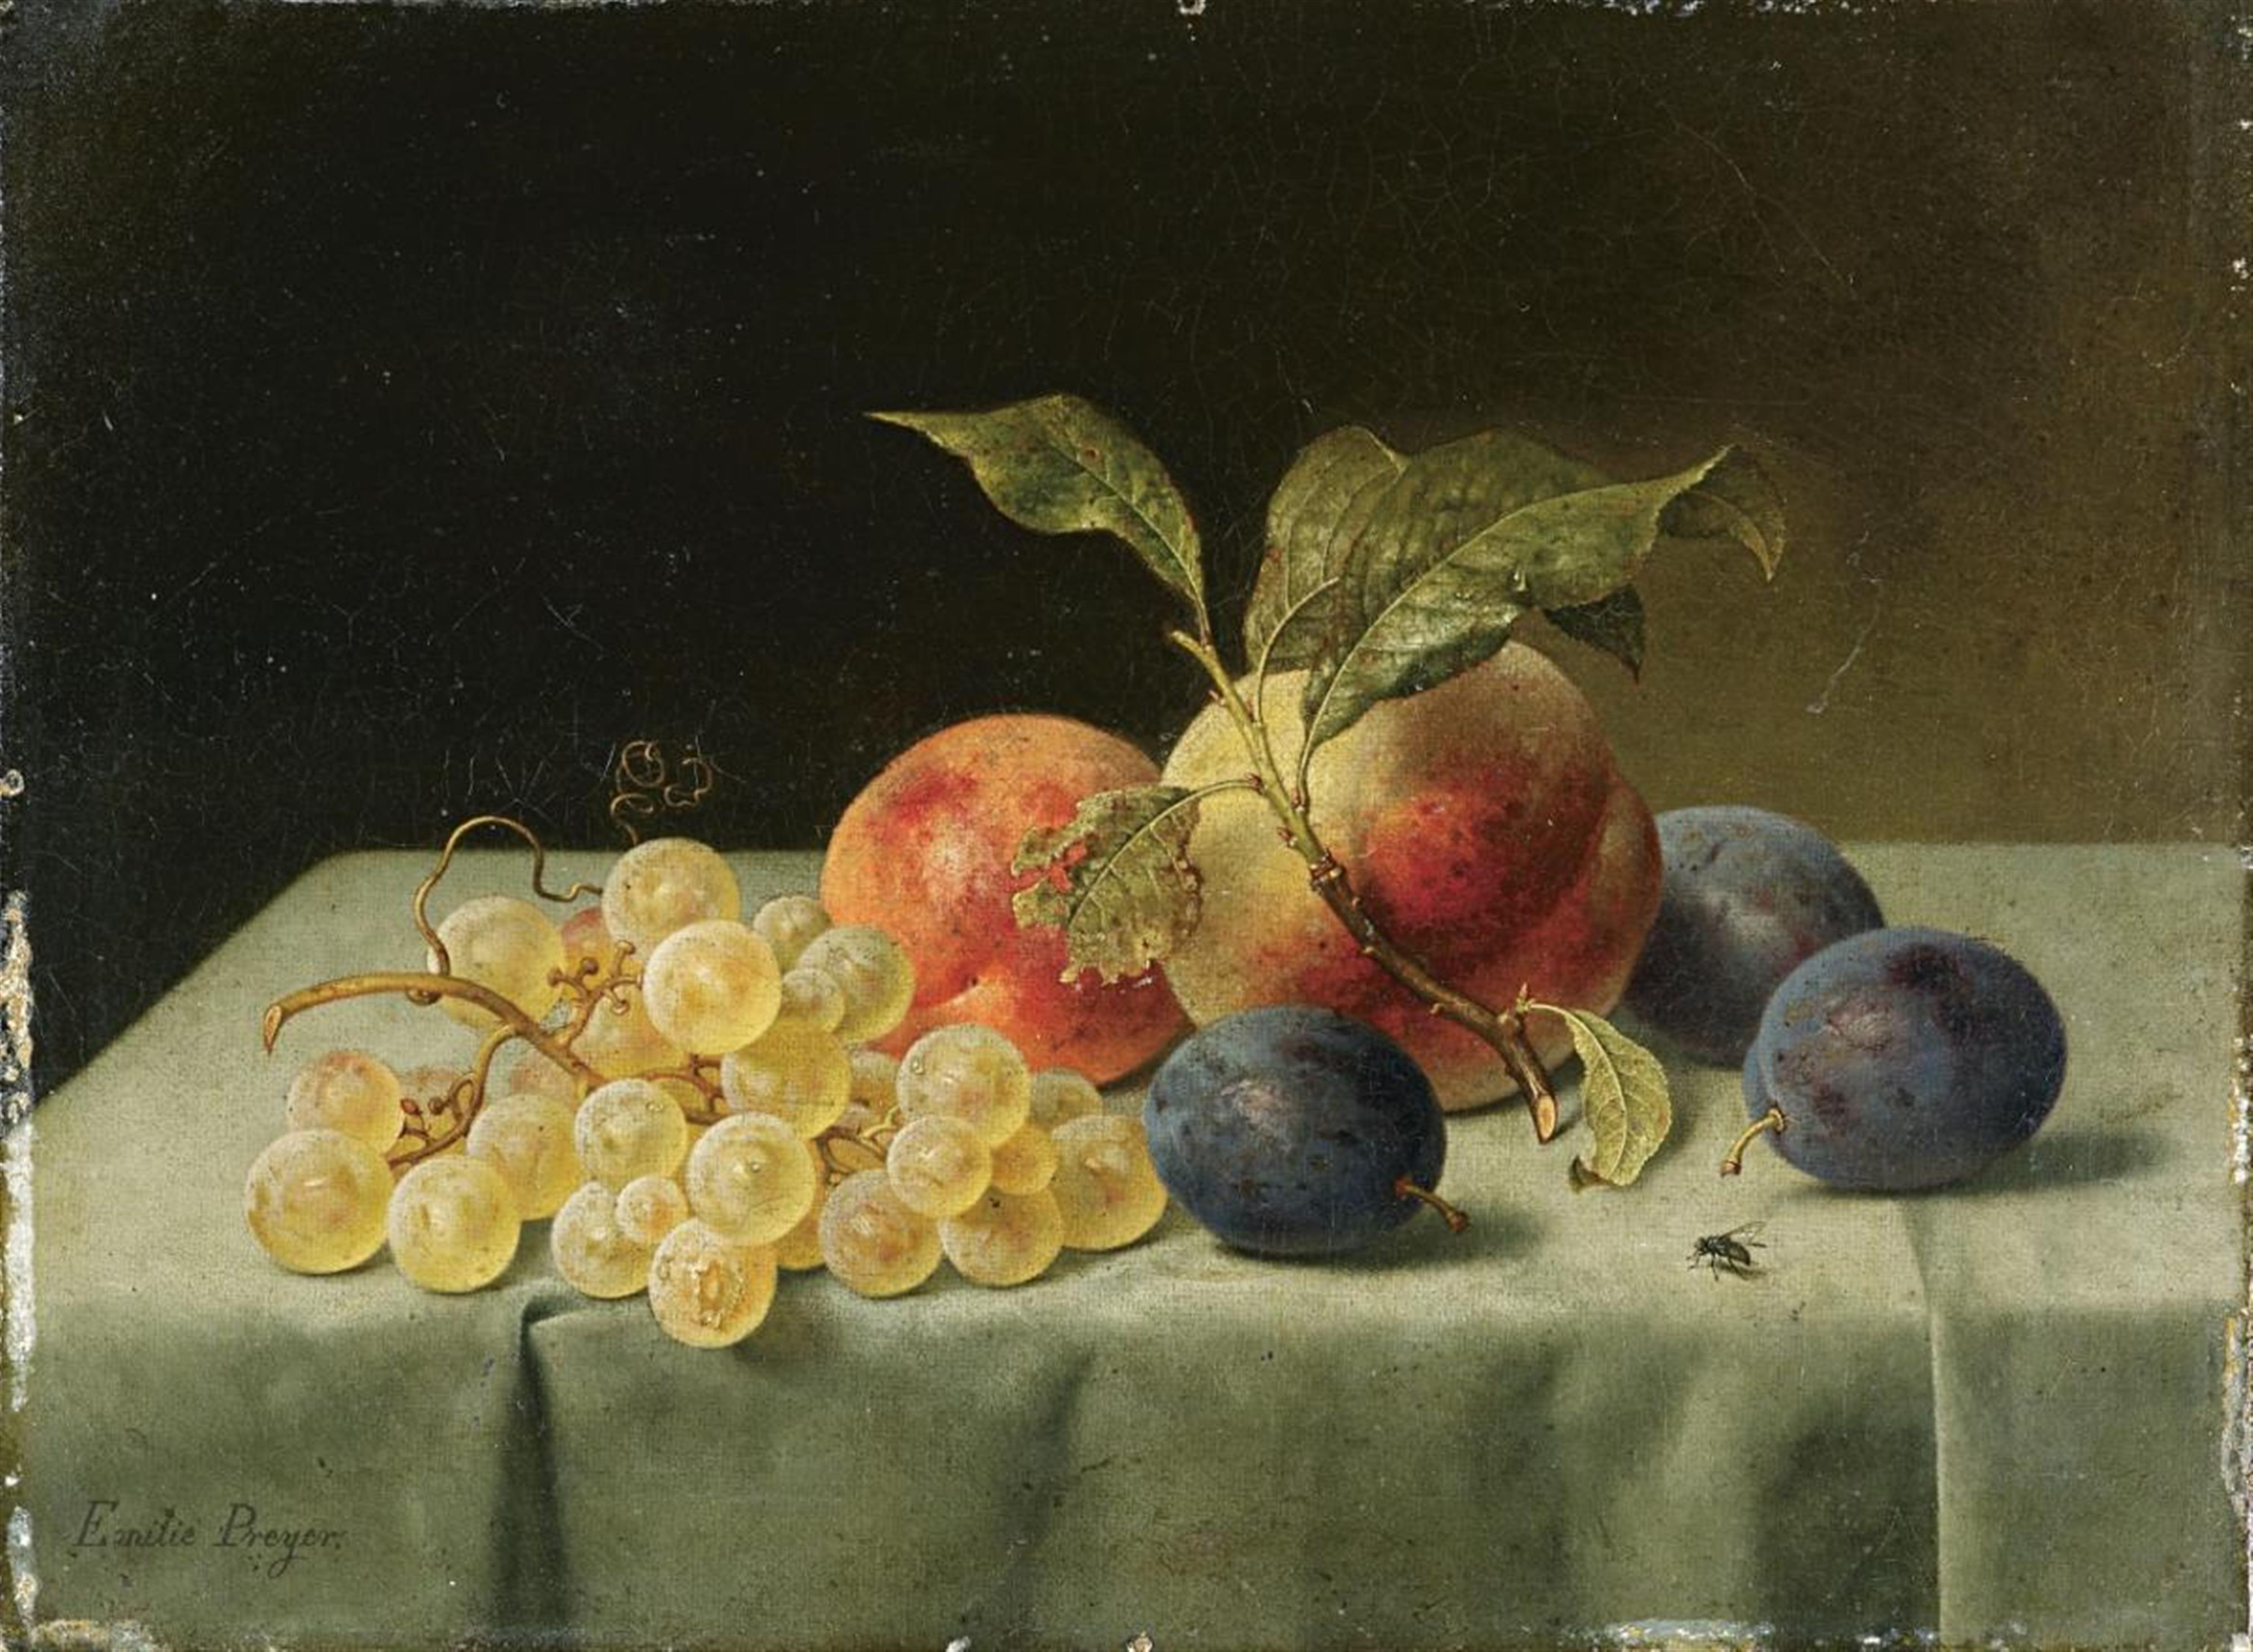 Emilie Preyer - FRUIT STILL LIFE WITH PEACHES, PLUMS, AND GRAPES - image-1